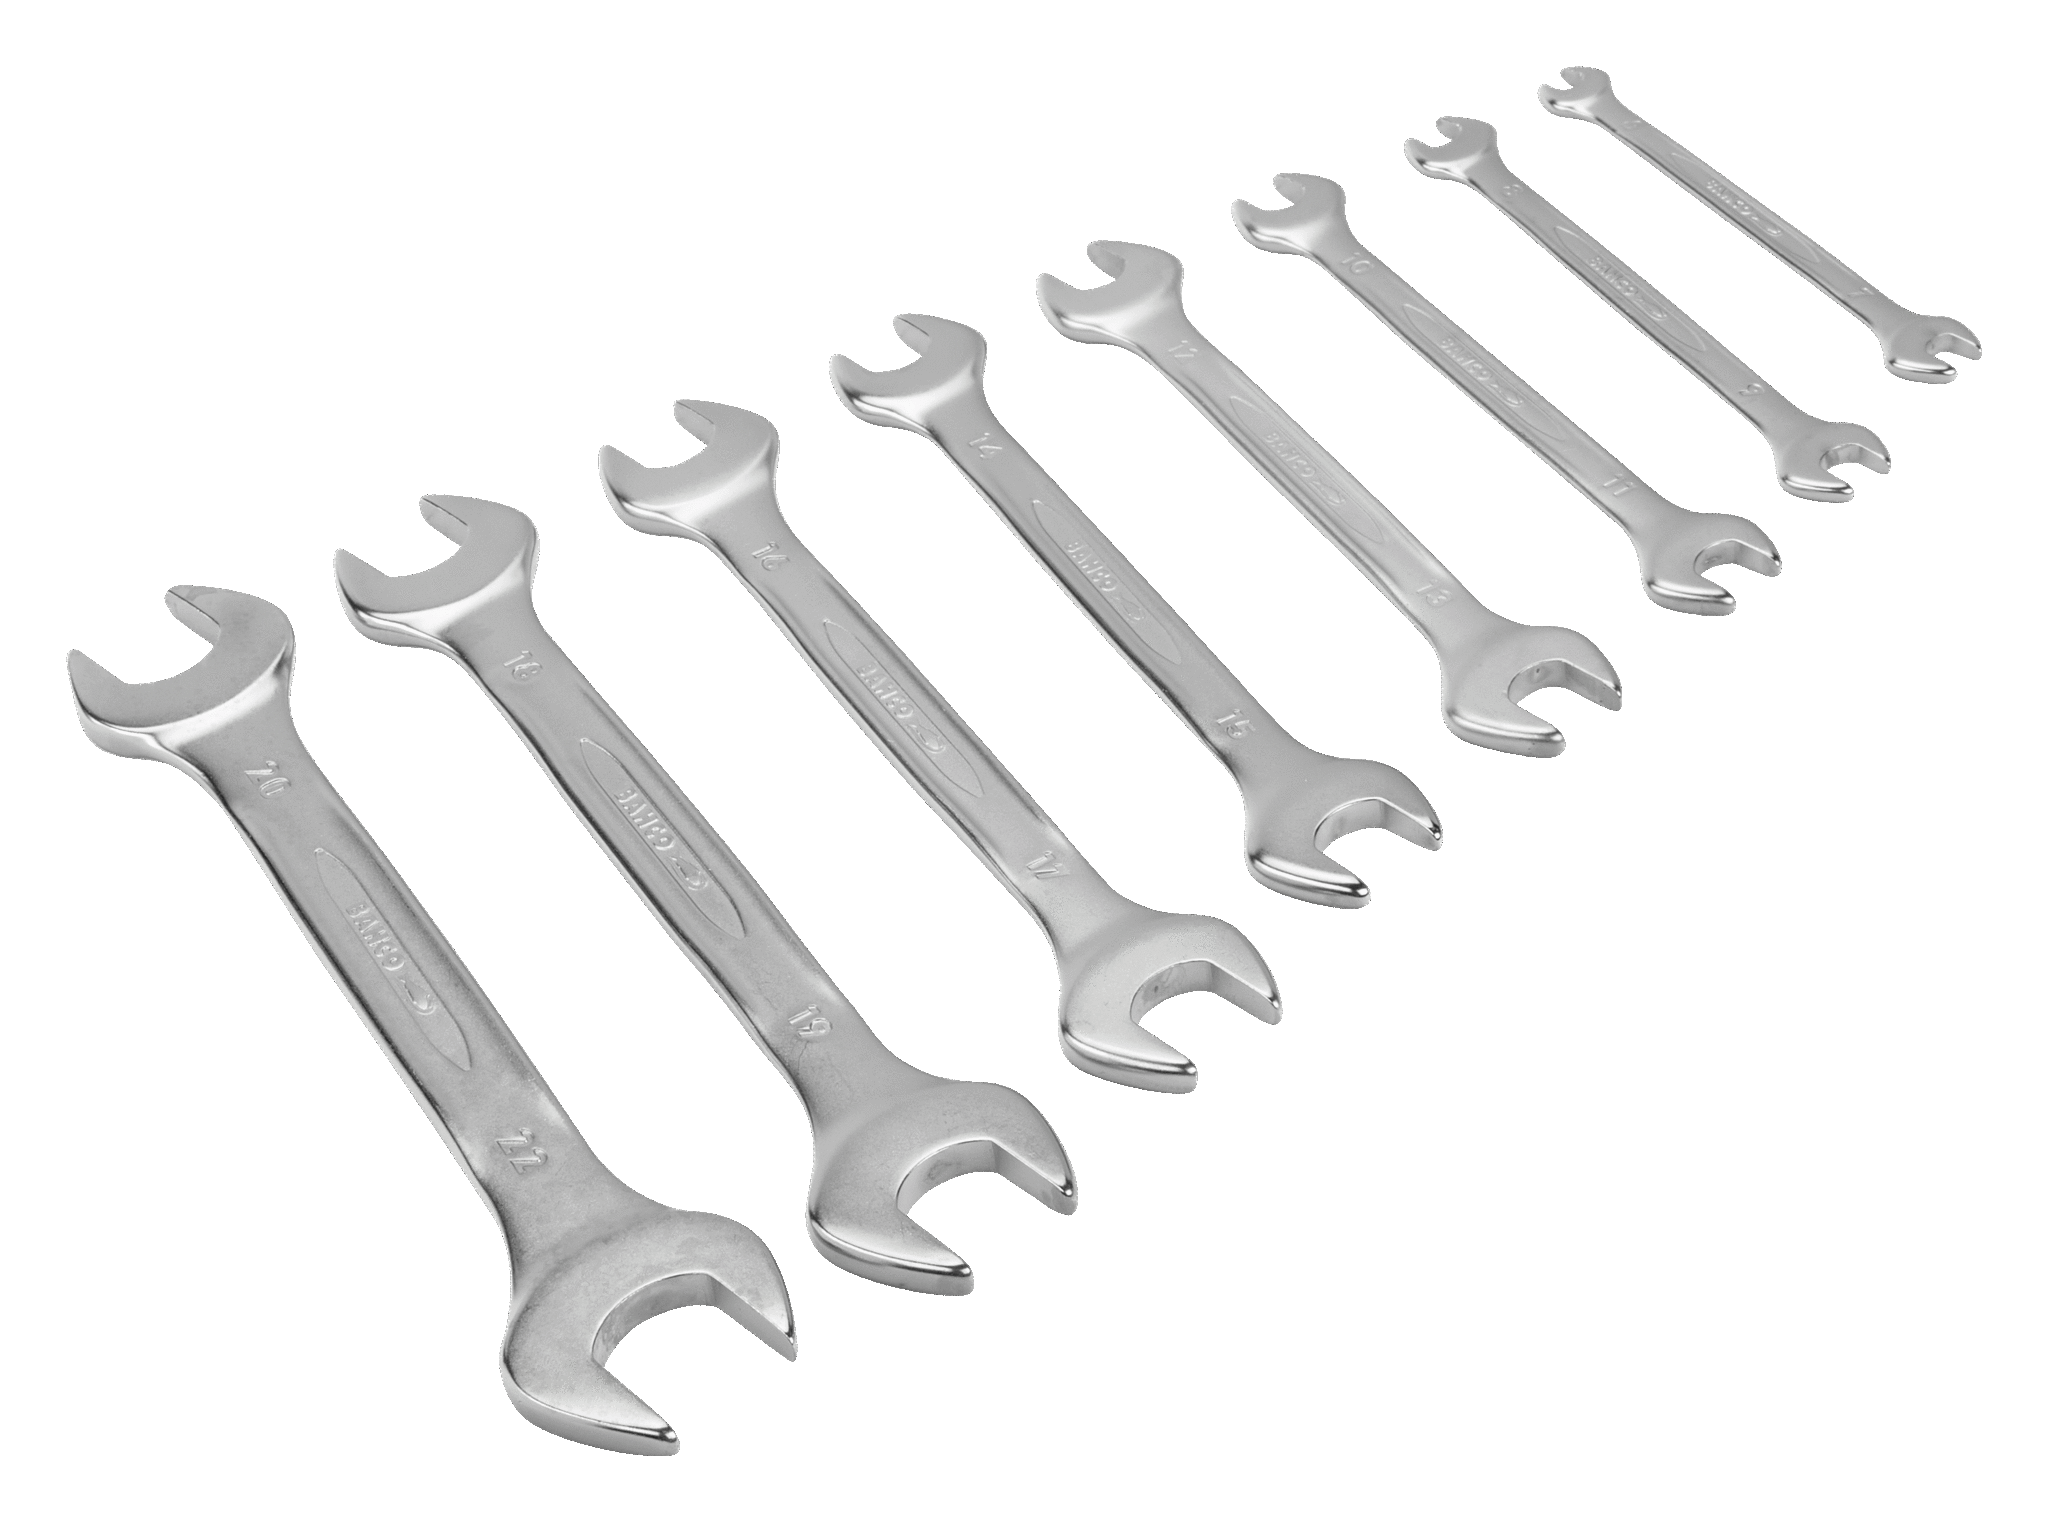 Metric Double Open End Wrench Set - 8 Pcs/Box | BAHCO | Bahco UK